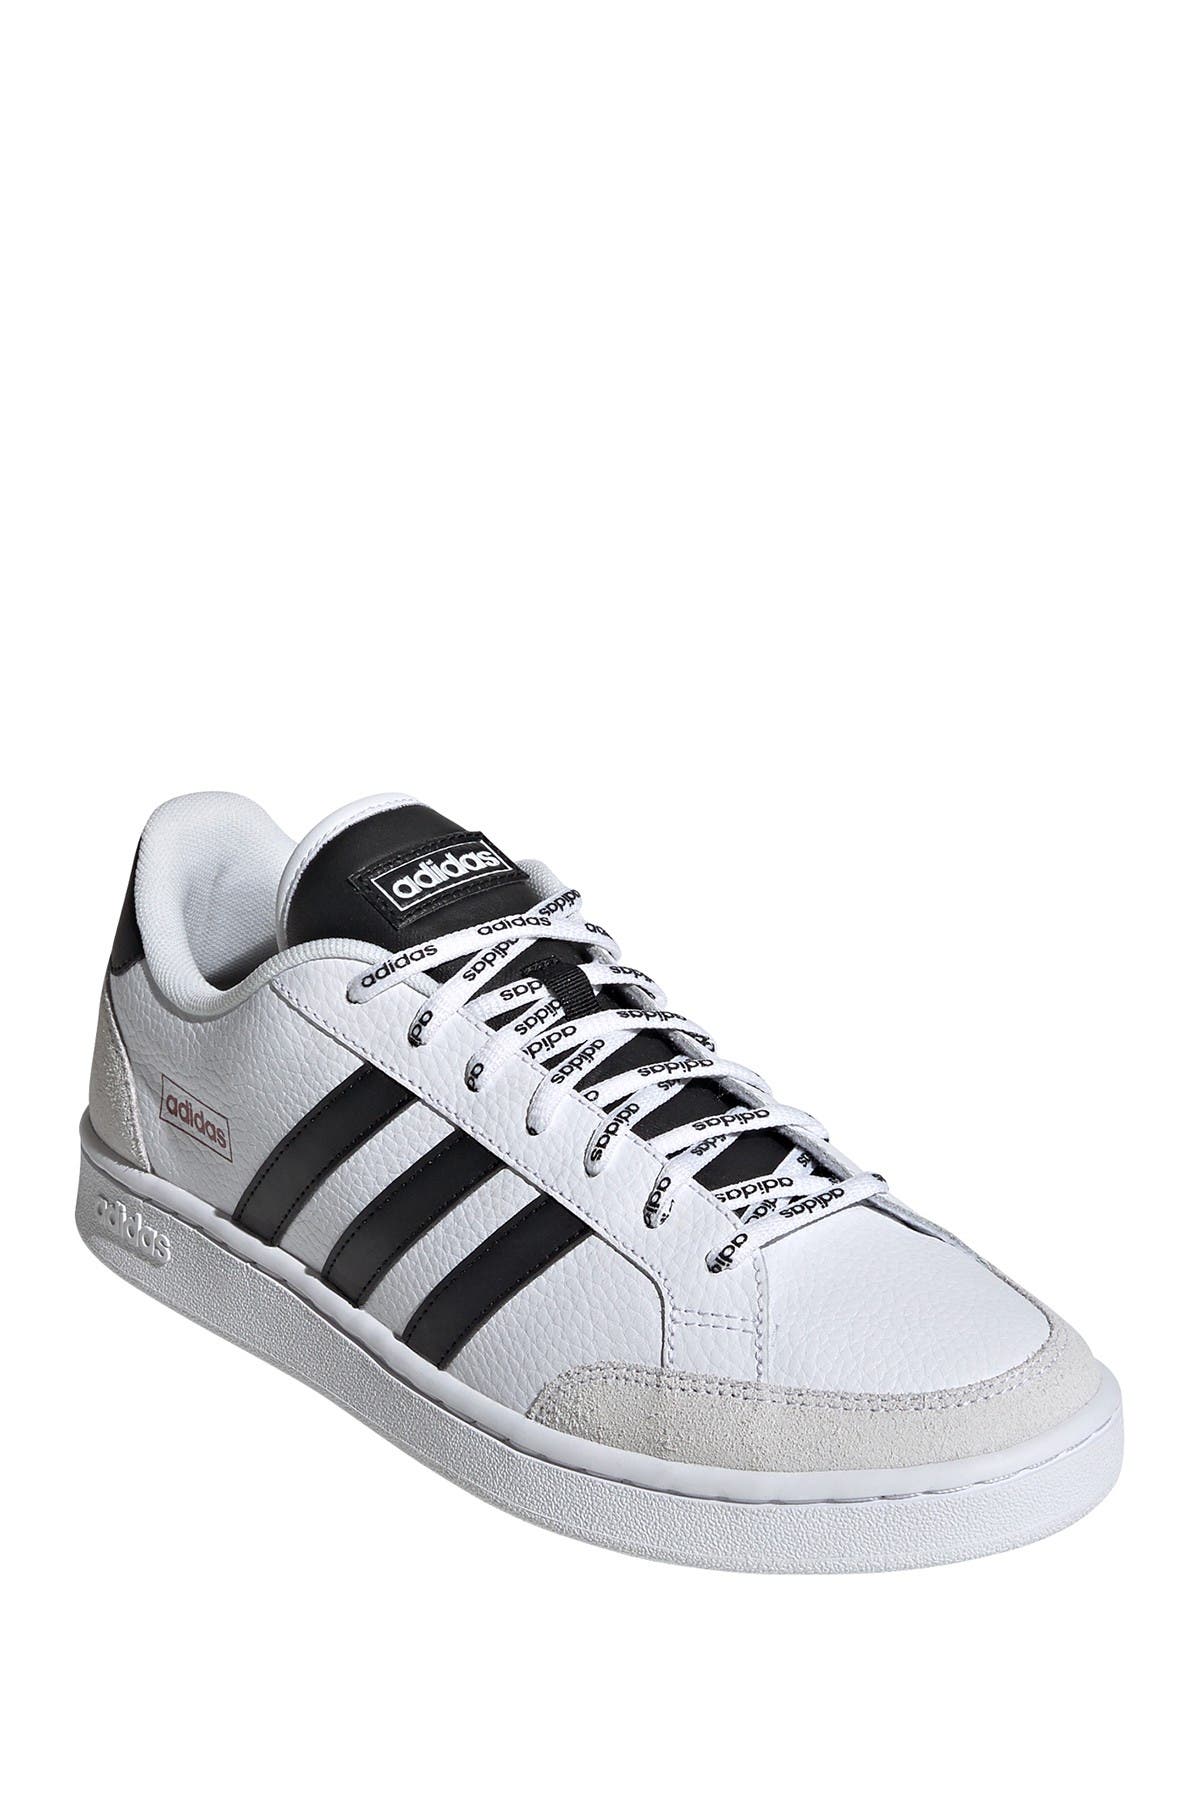 adidas | Grand Court SE Leather Sneaker 